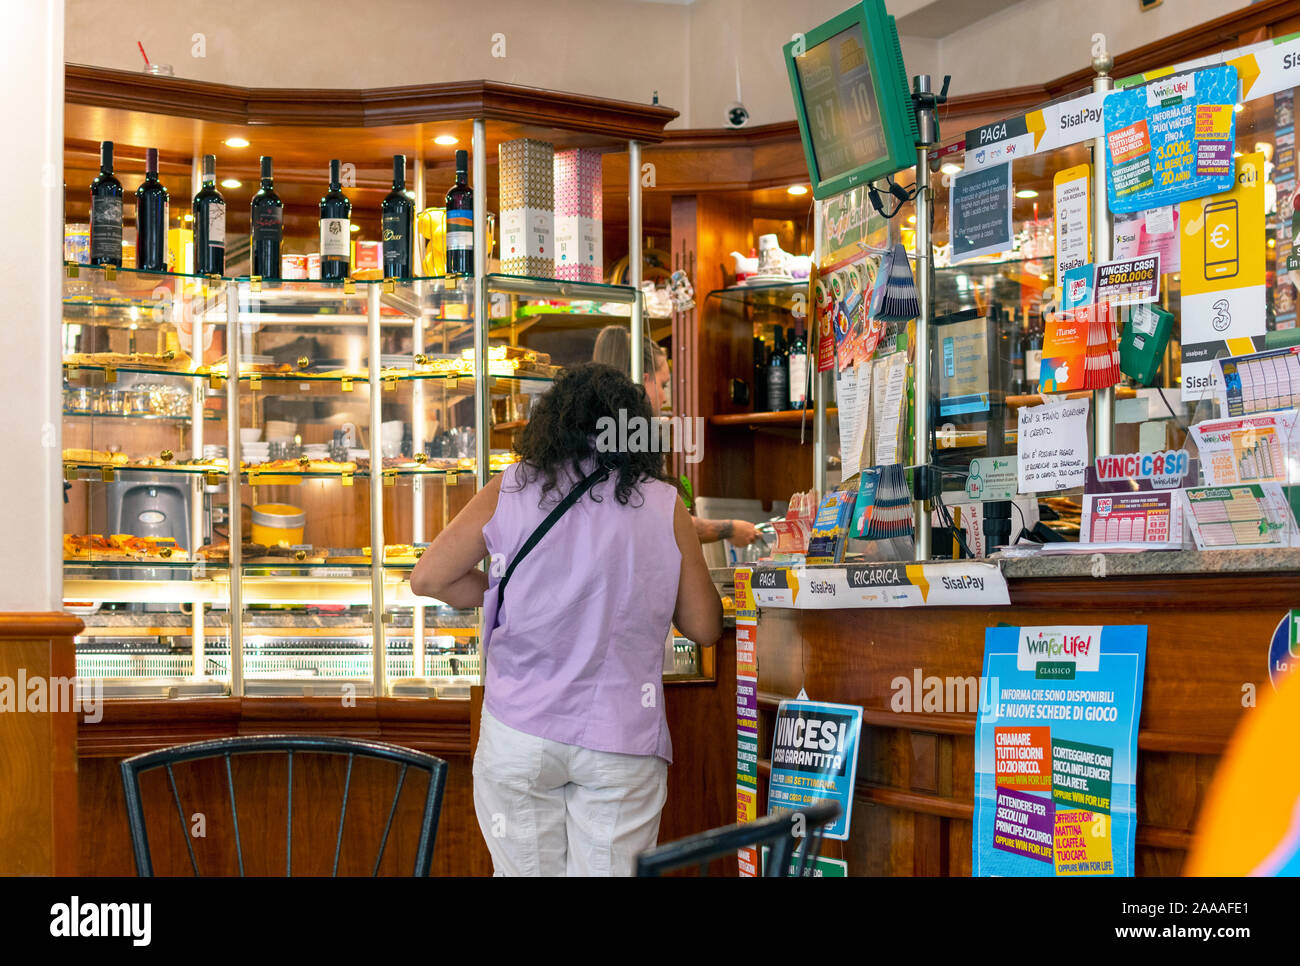 A female customer buys lottery tickets at a Tabacchi shop in the Ligurian city of Dolceacqua, Italy Stock Photo